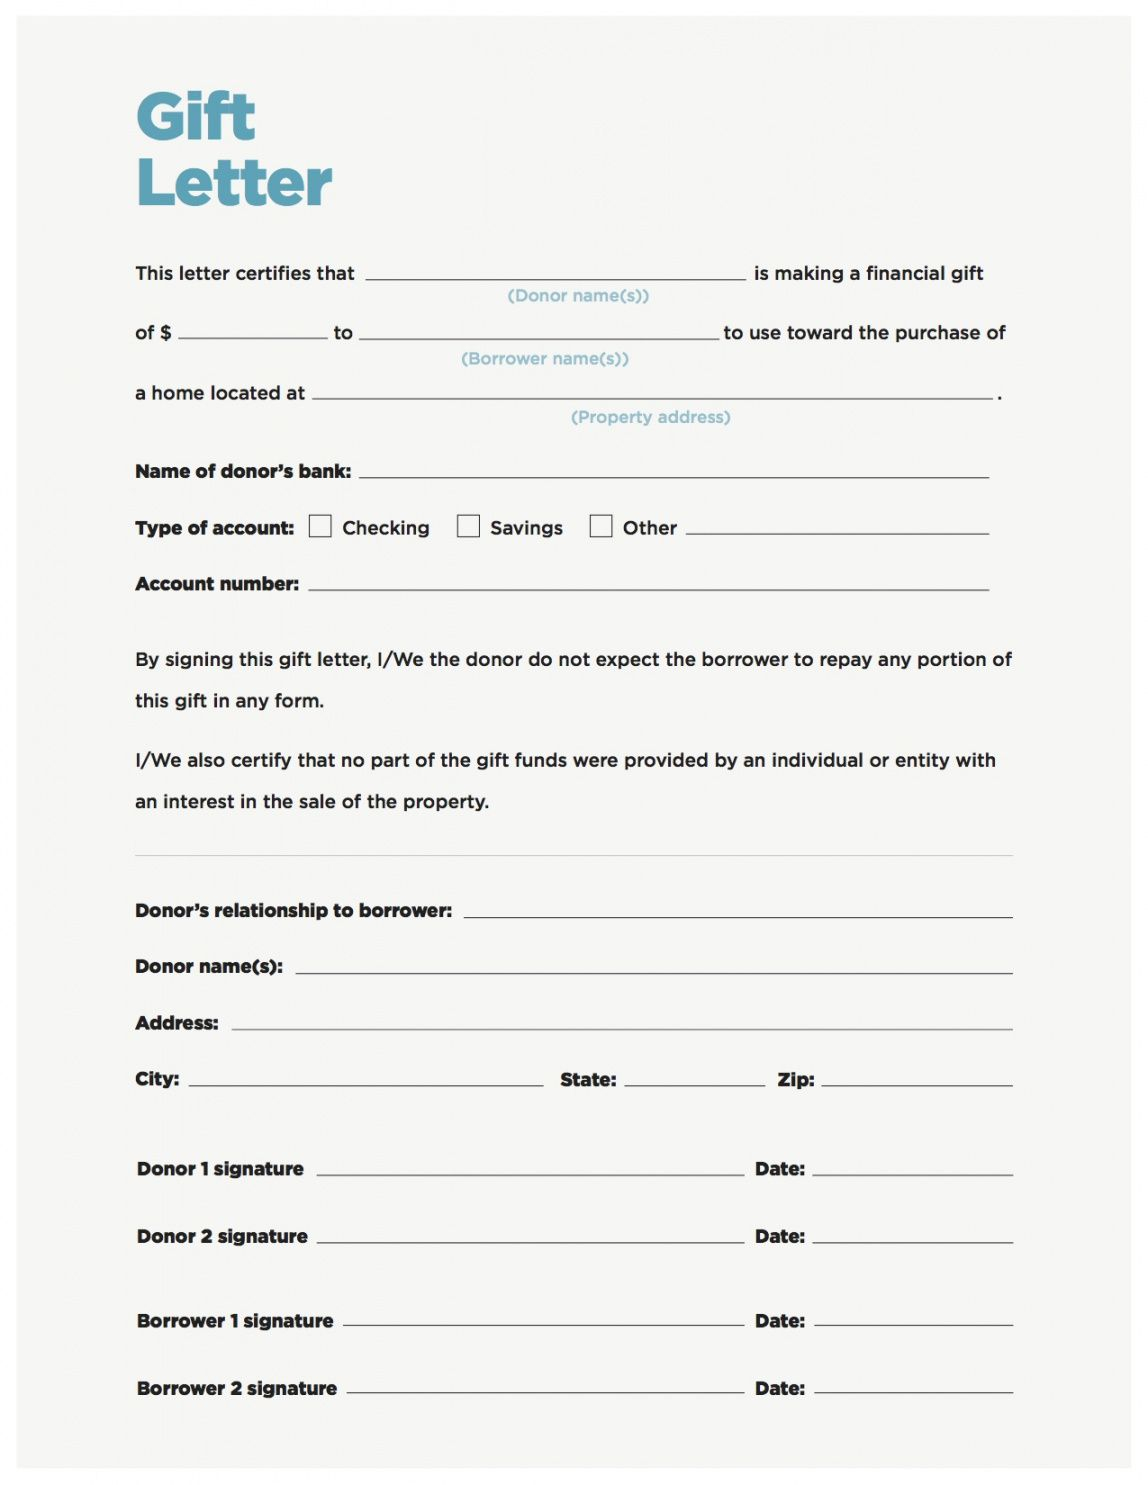 mortgage gift letter pdf - Search for a good cause Regarding Gifted Deposit Letter Template For Solicitor Throughout Gifted Deposit Letter Template For Solicitor